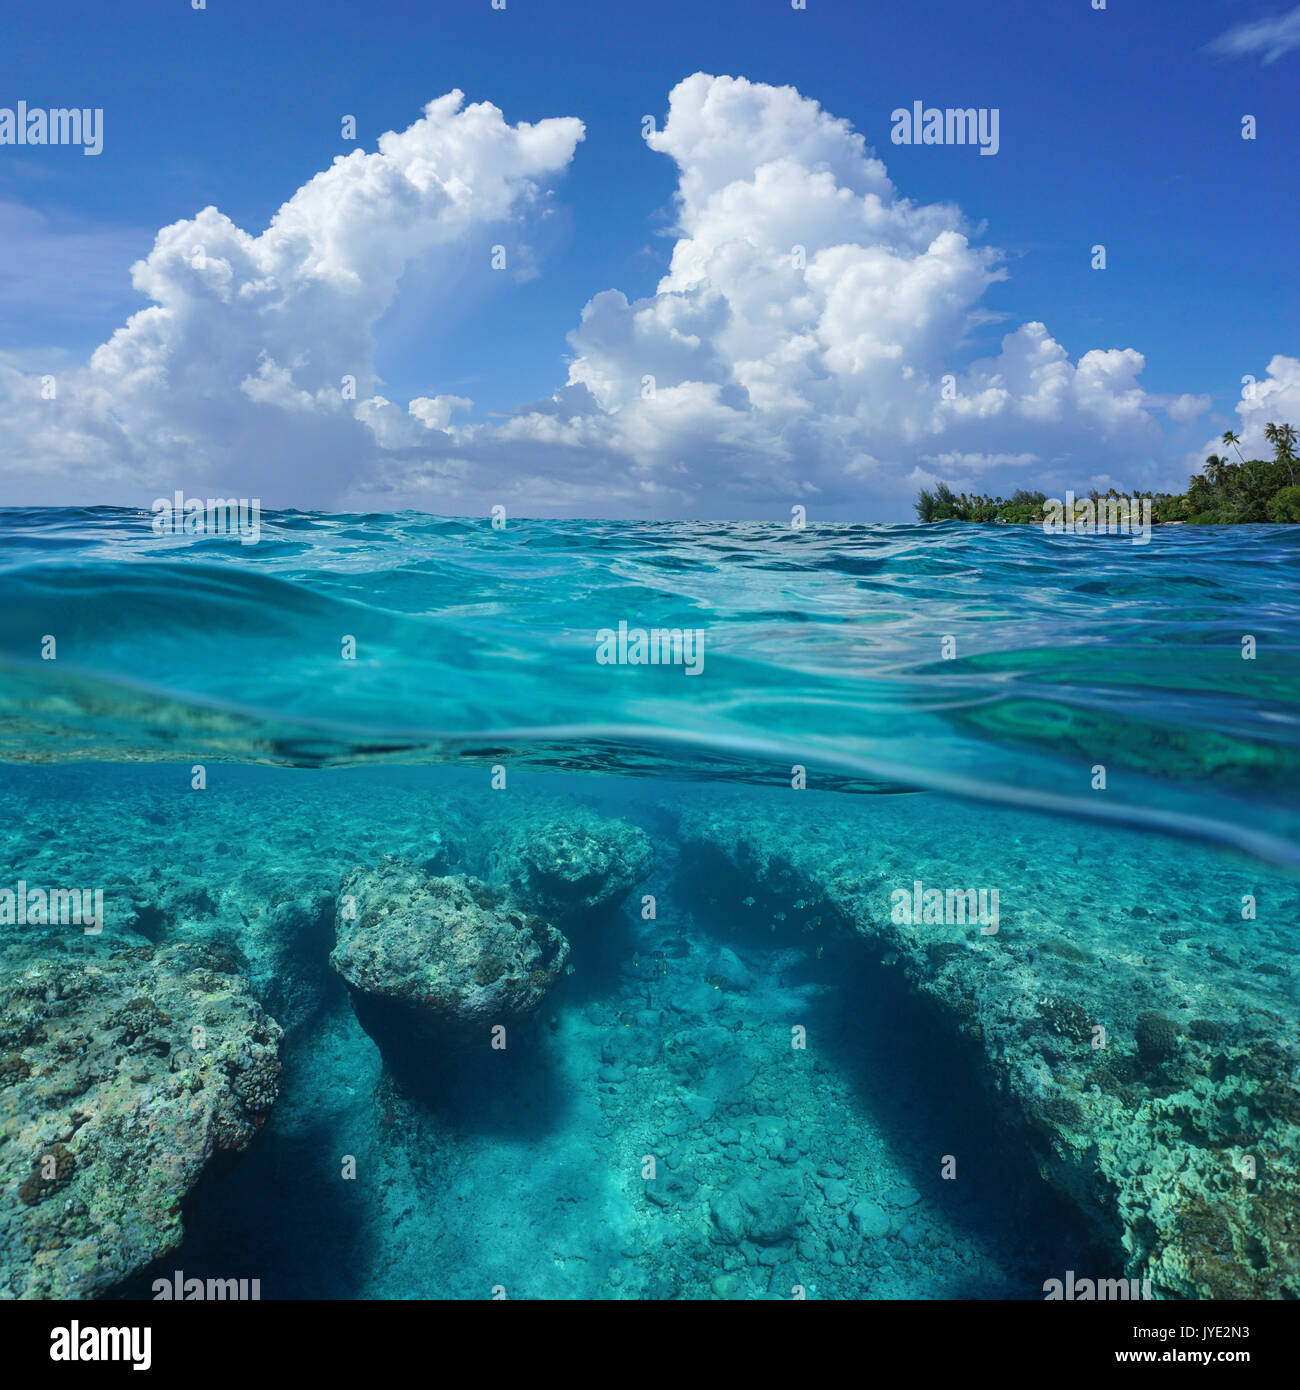 Seascape over and under sea surface, cloudy blue sky with rocky seabed underwater split by waterline, Huahine island, Pacific ocean, French Polynesia Stock Photo